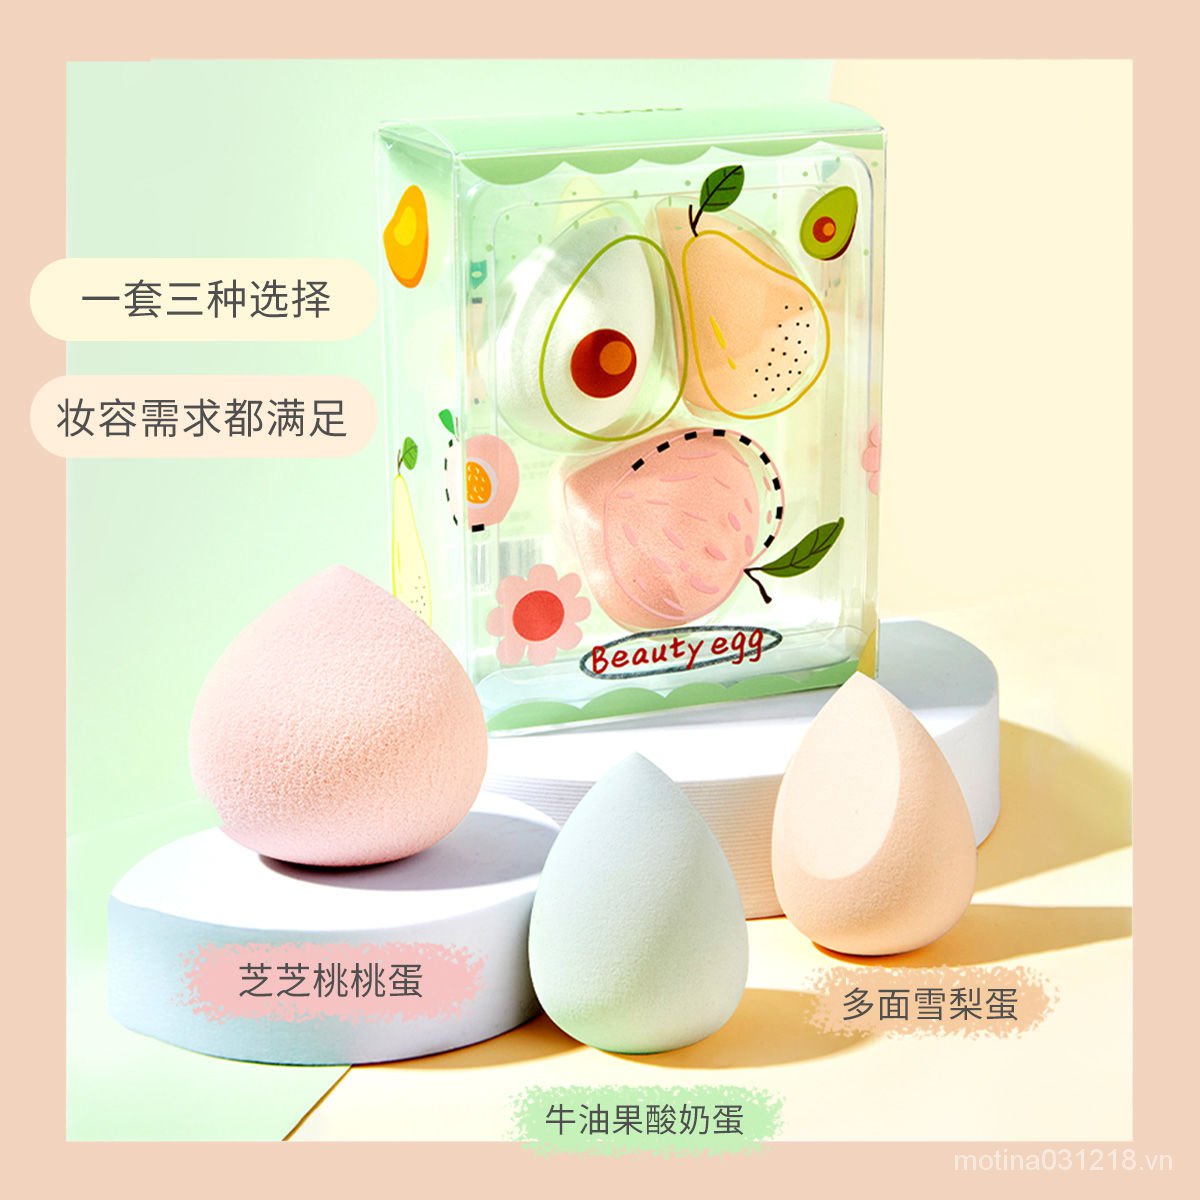 【NOVO】Blender Don't Eat Powder Air Cushion Puff Sponge Egg Cotton Pad Makeup Egg Cosmetic Students Wet and Dry